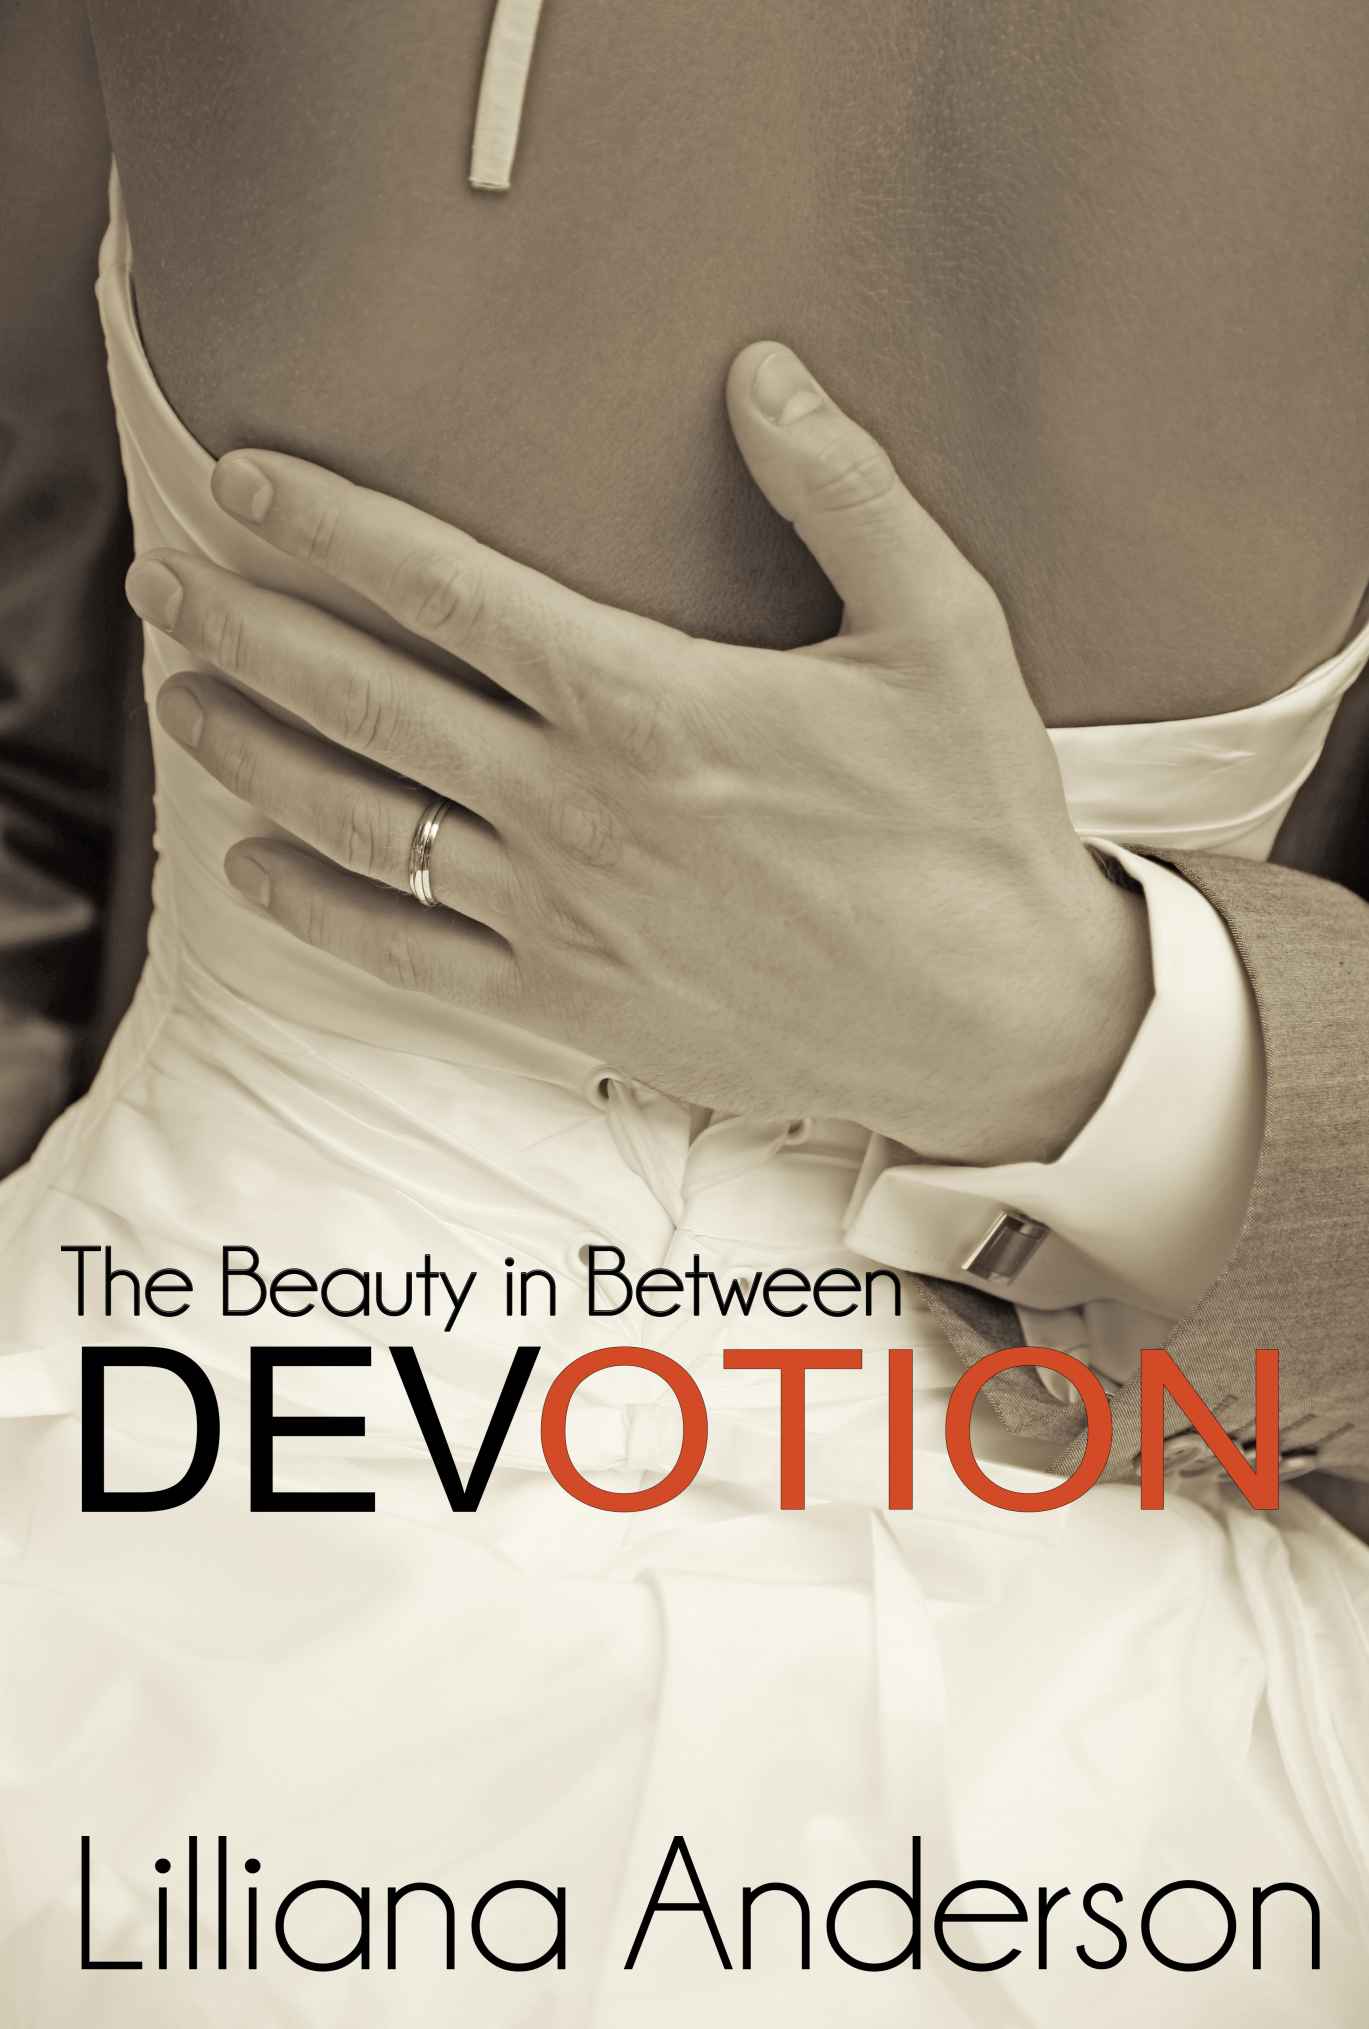 Devotion: The Beauty in Between (Beautiful Series book 4.5) by Lilliana Anderson